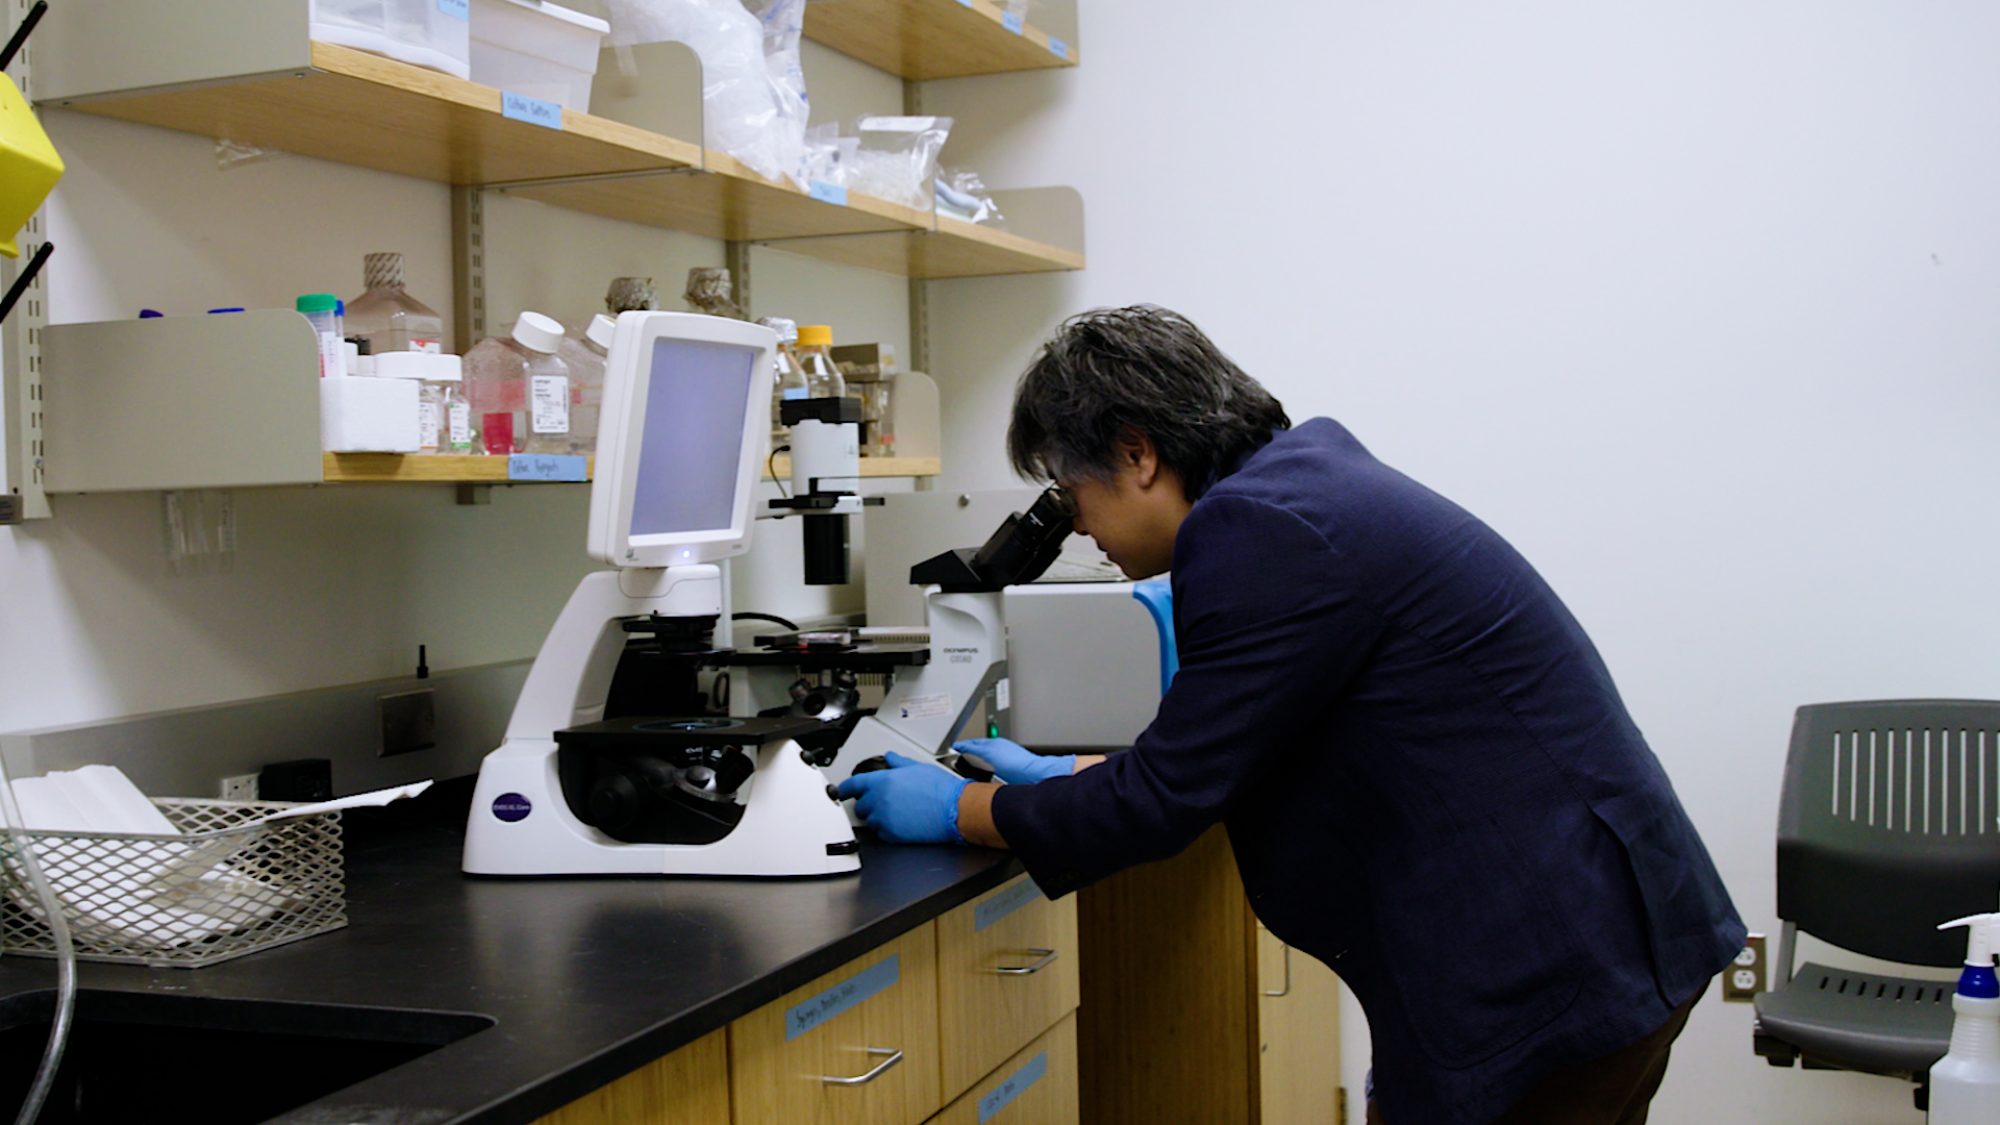 Jeffrey Huang looking into a microscope in a lab setting